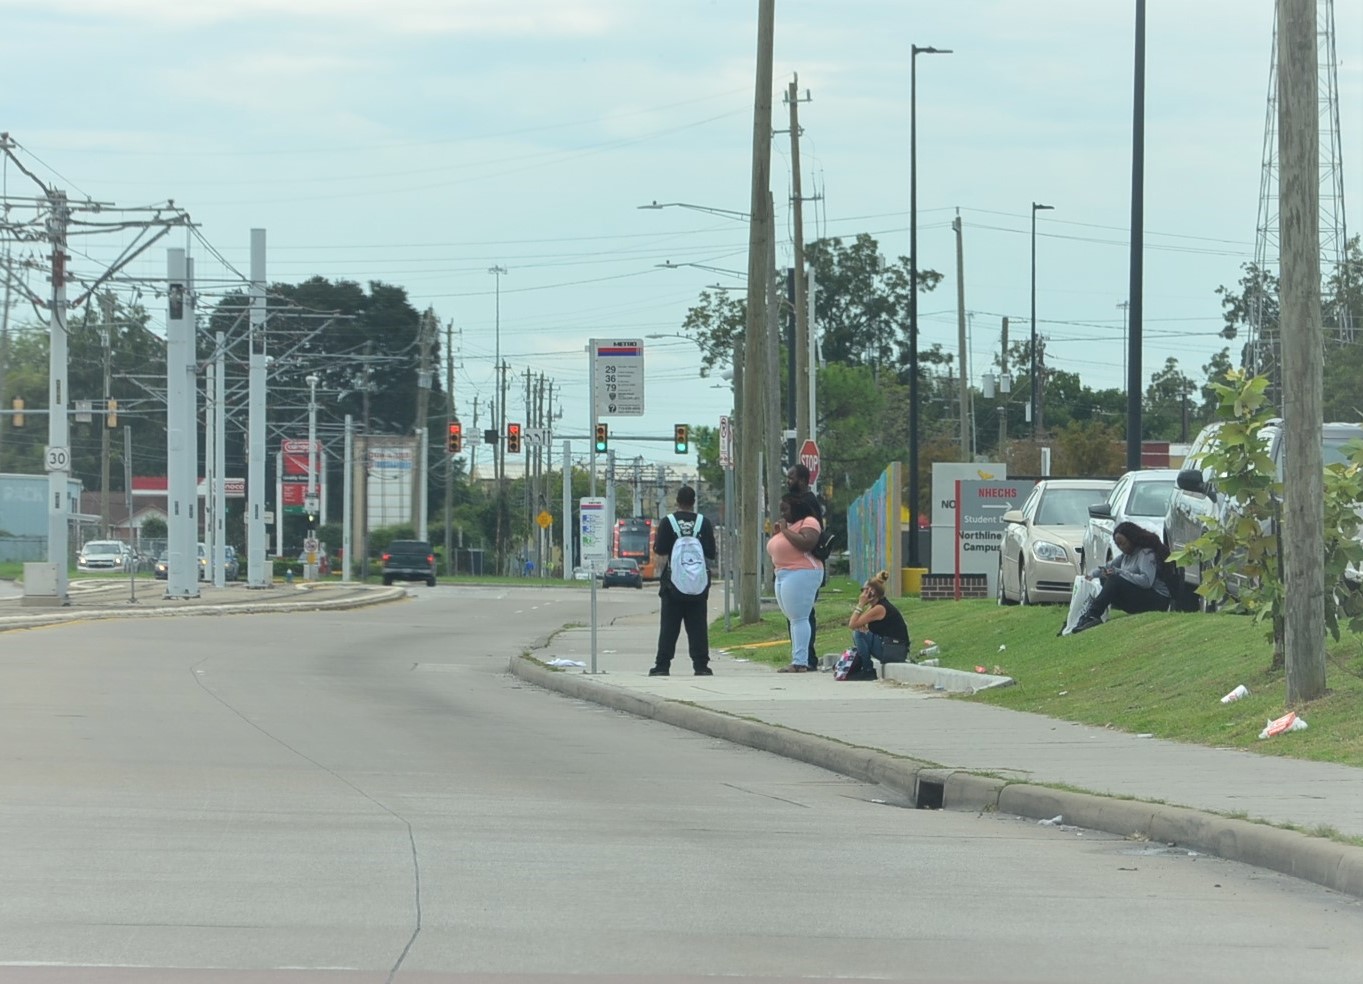 A group of students waiting on the bus near the Houston Community College Northline Campus. There is no bus shelter or any other amenity at the bus stop.